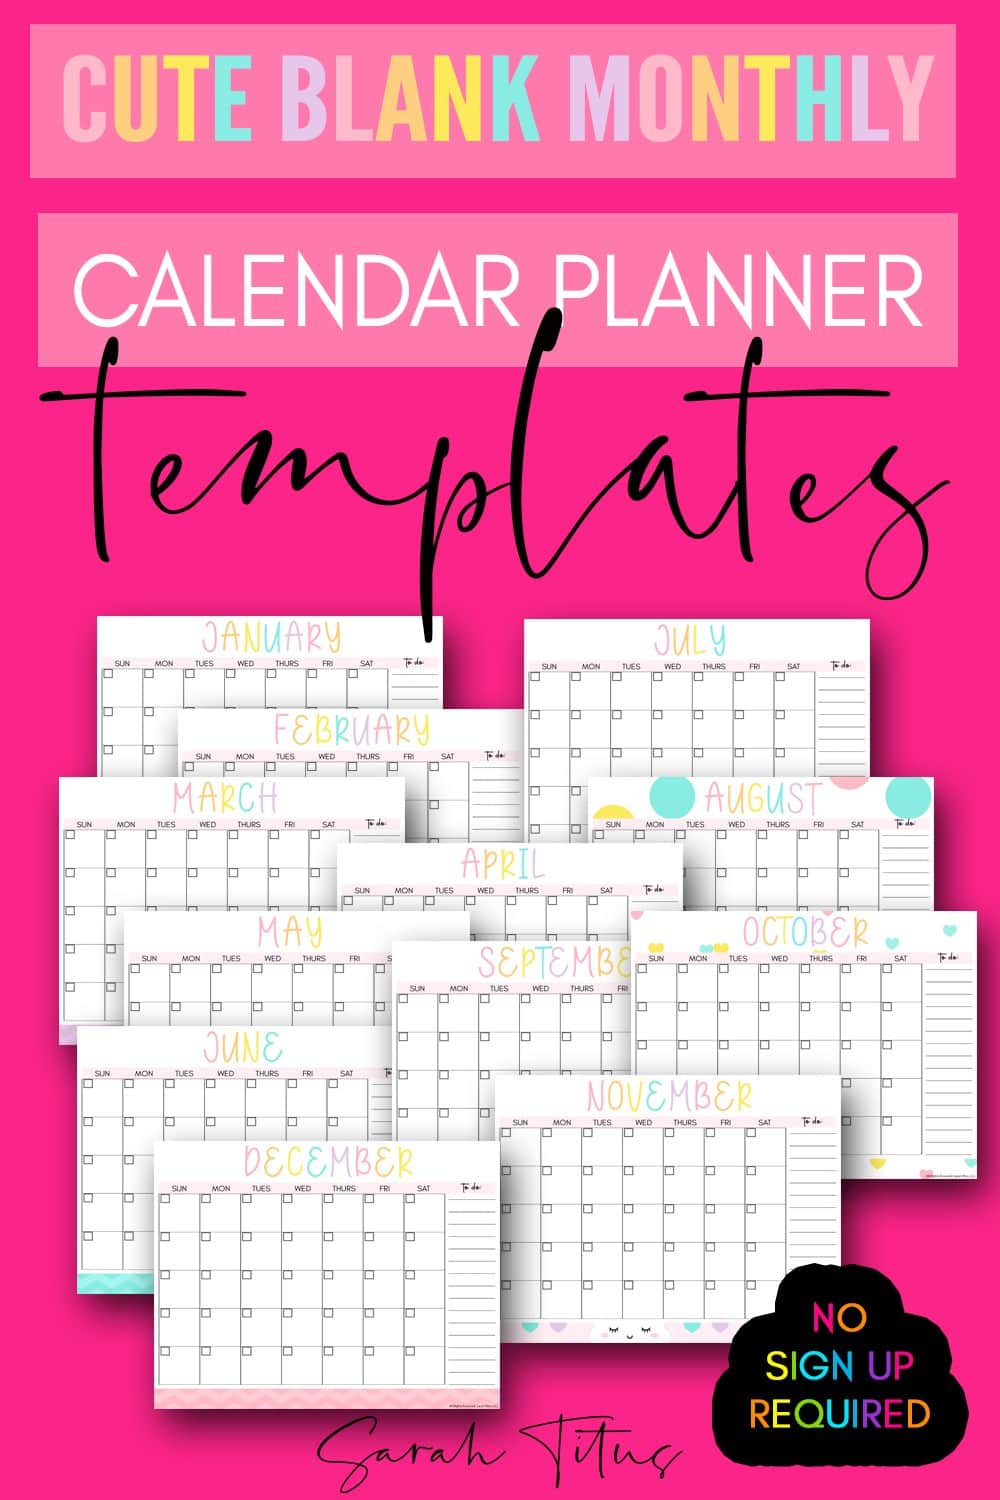 free-blank-monthly-calendar-printables-find-a-free-printable-editable-monthly-calendar